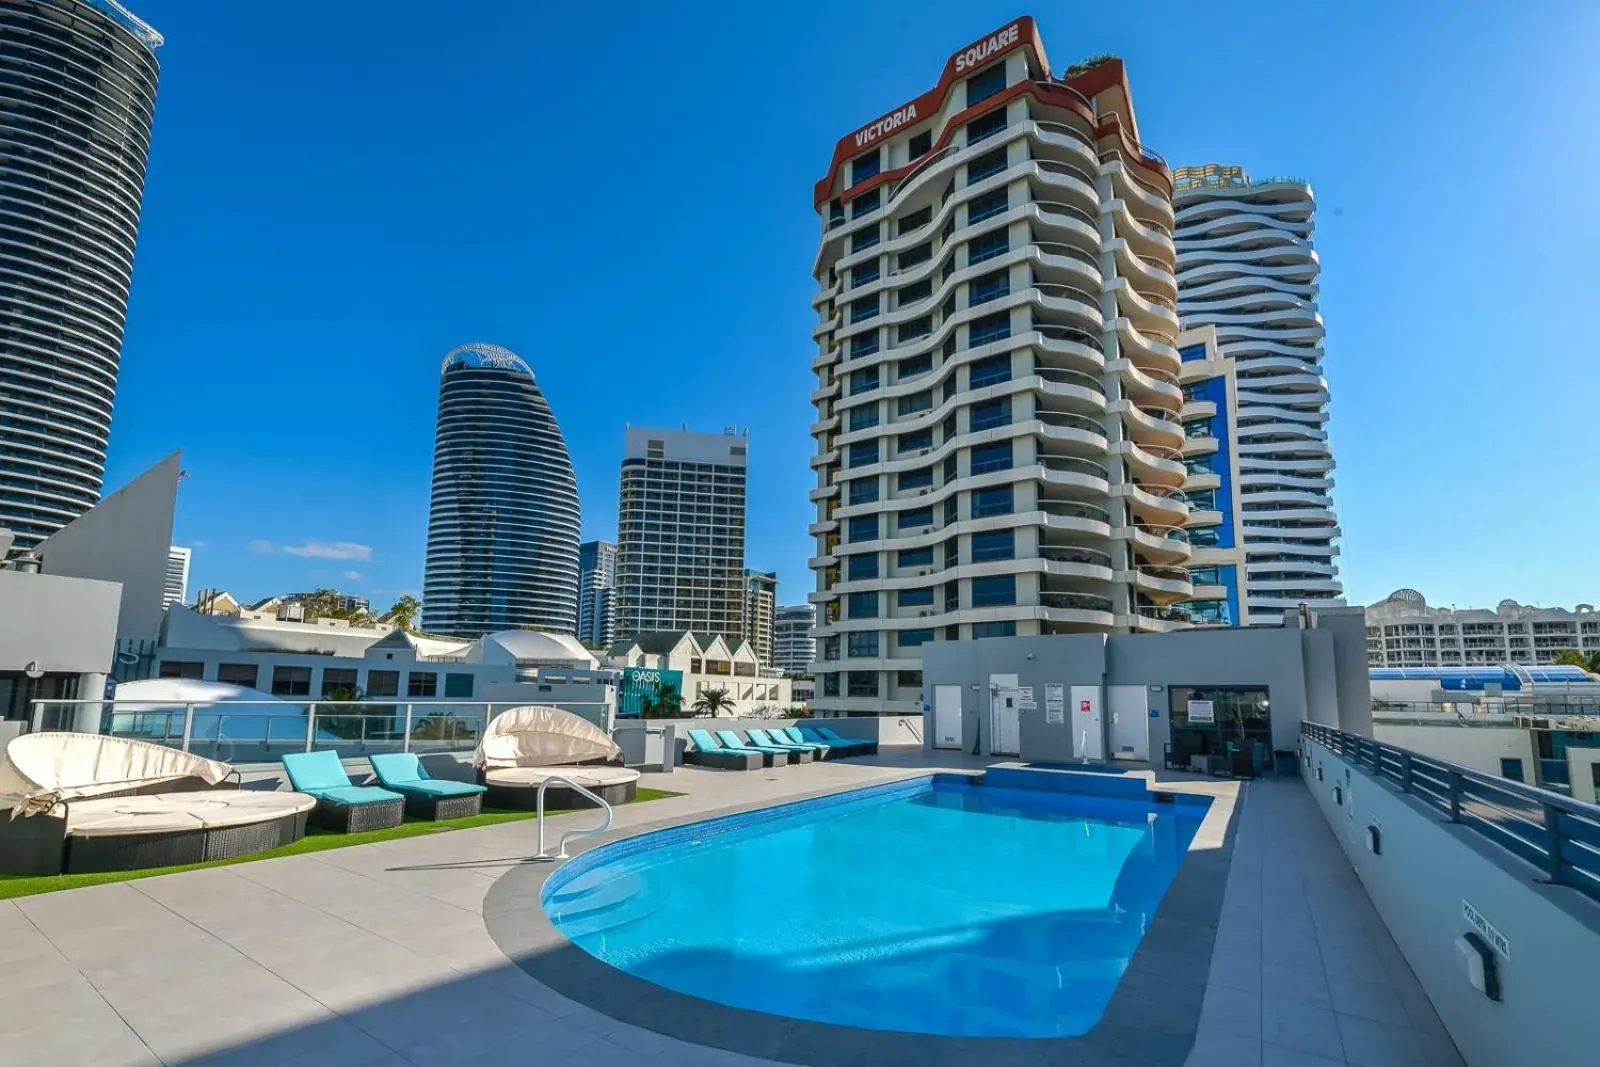 Property building, Swimming Pool in Victoria Square Apartments